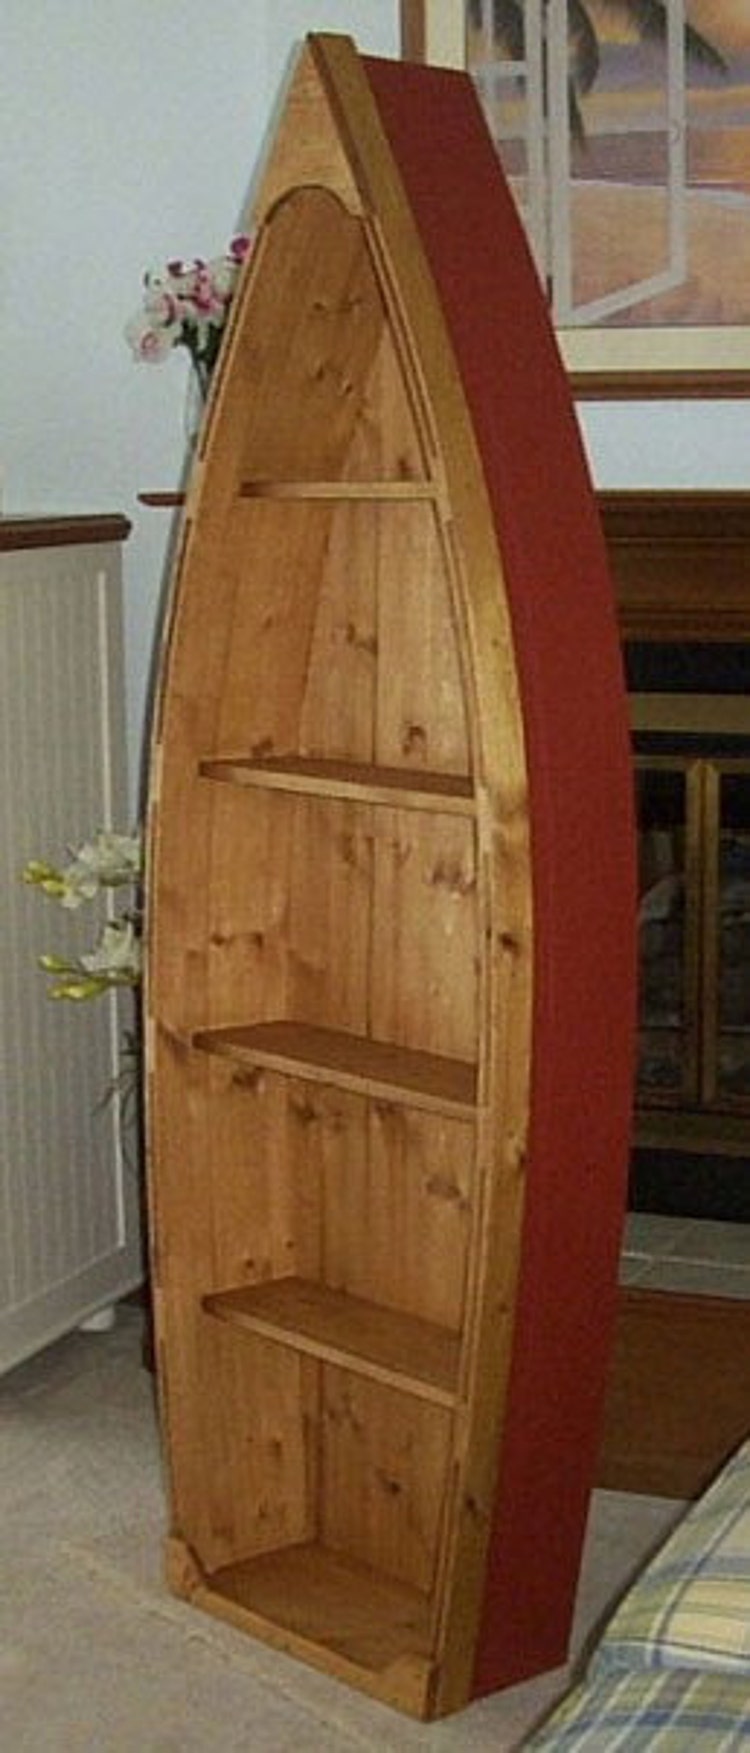 6 Foot Handcrafted Wood Knotty Pine Row Boat by PoppasBoats